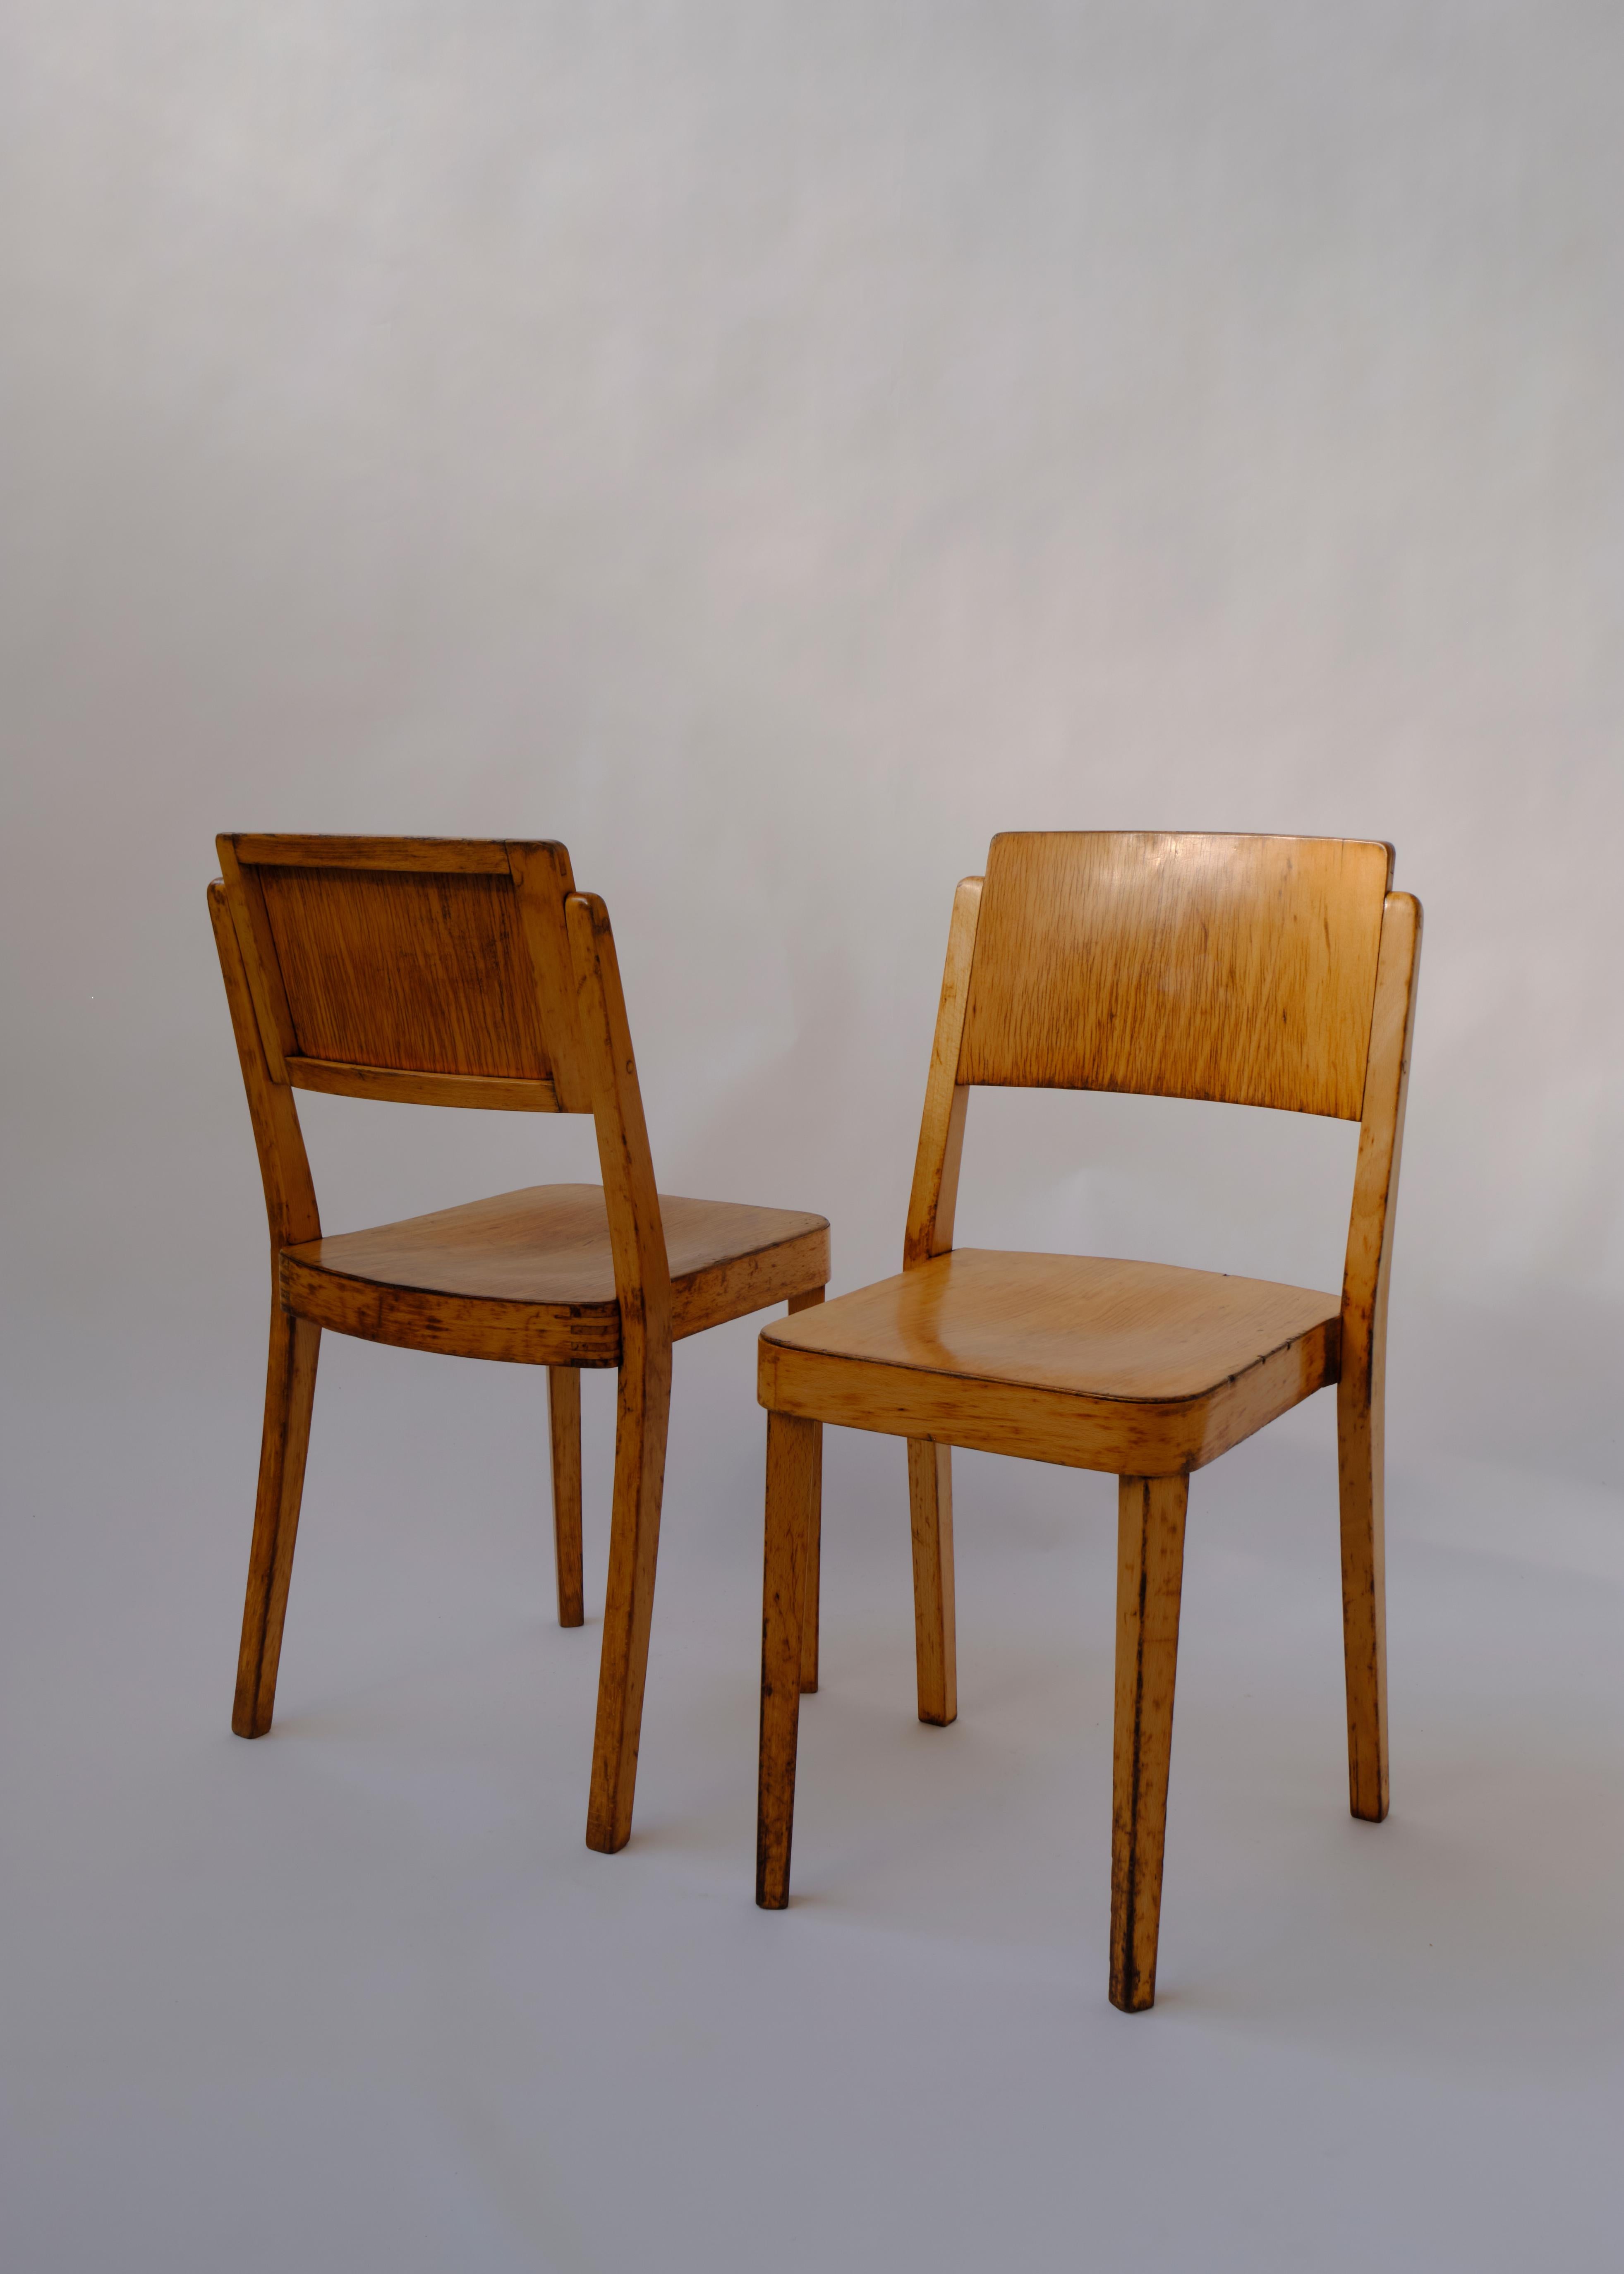 Pair of Stackable Model A 1250 Montana Chairs, by Thonet, 1930 For Sale 3